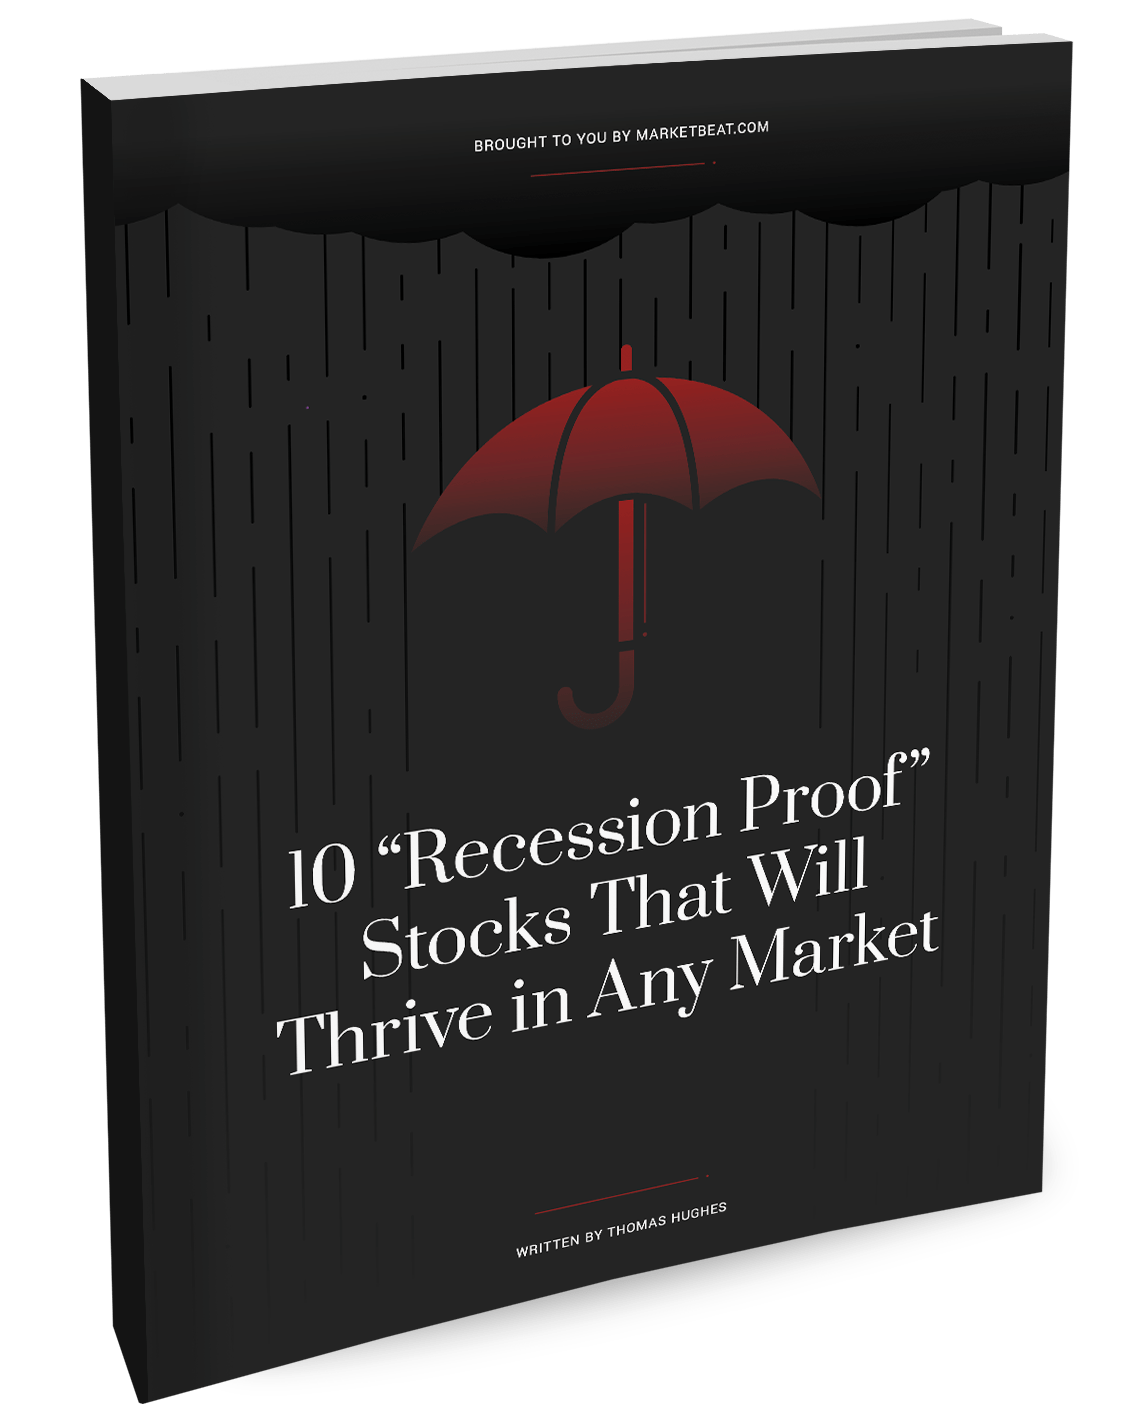 10 "Recession Proof" Stocks That Will Thrive in Any Market Cover